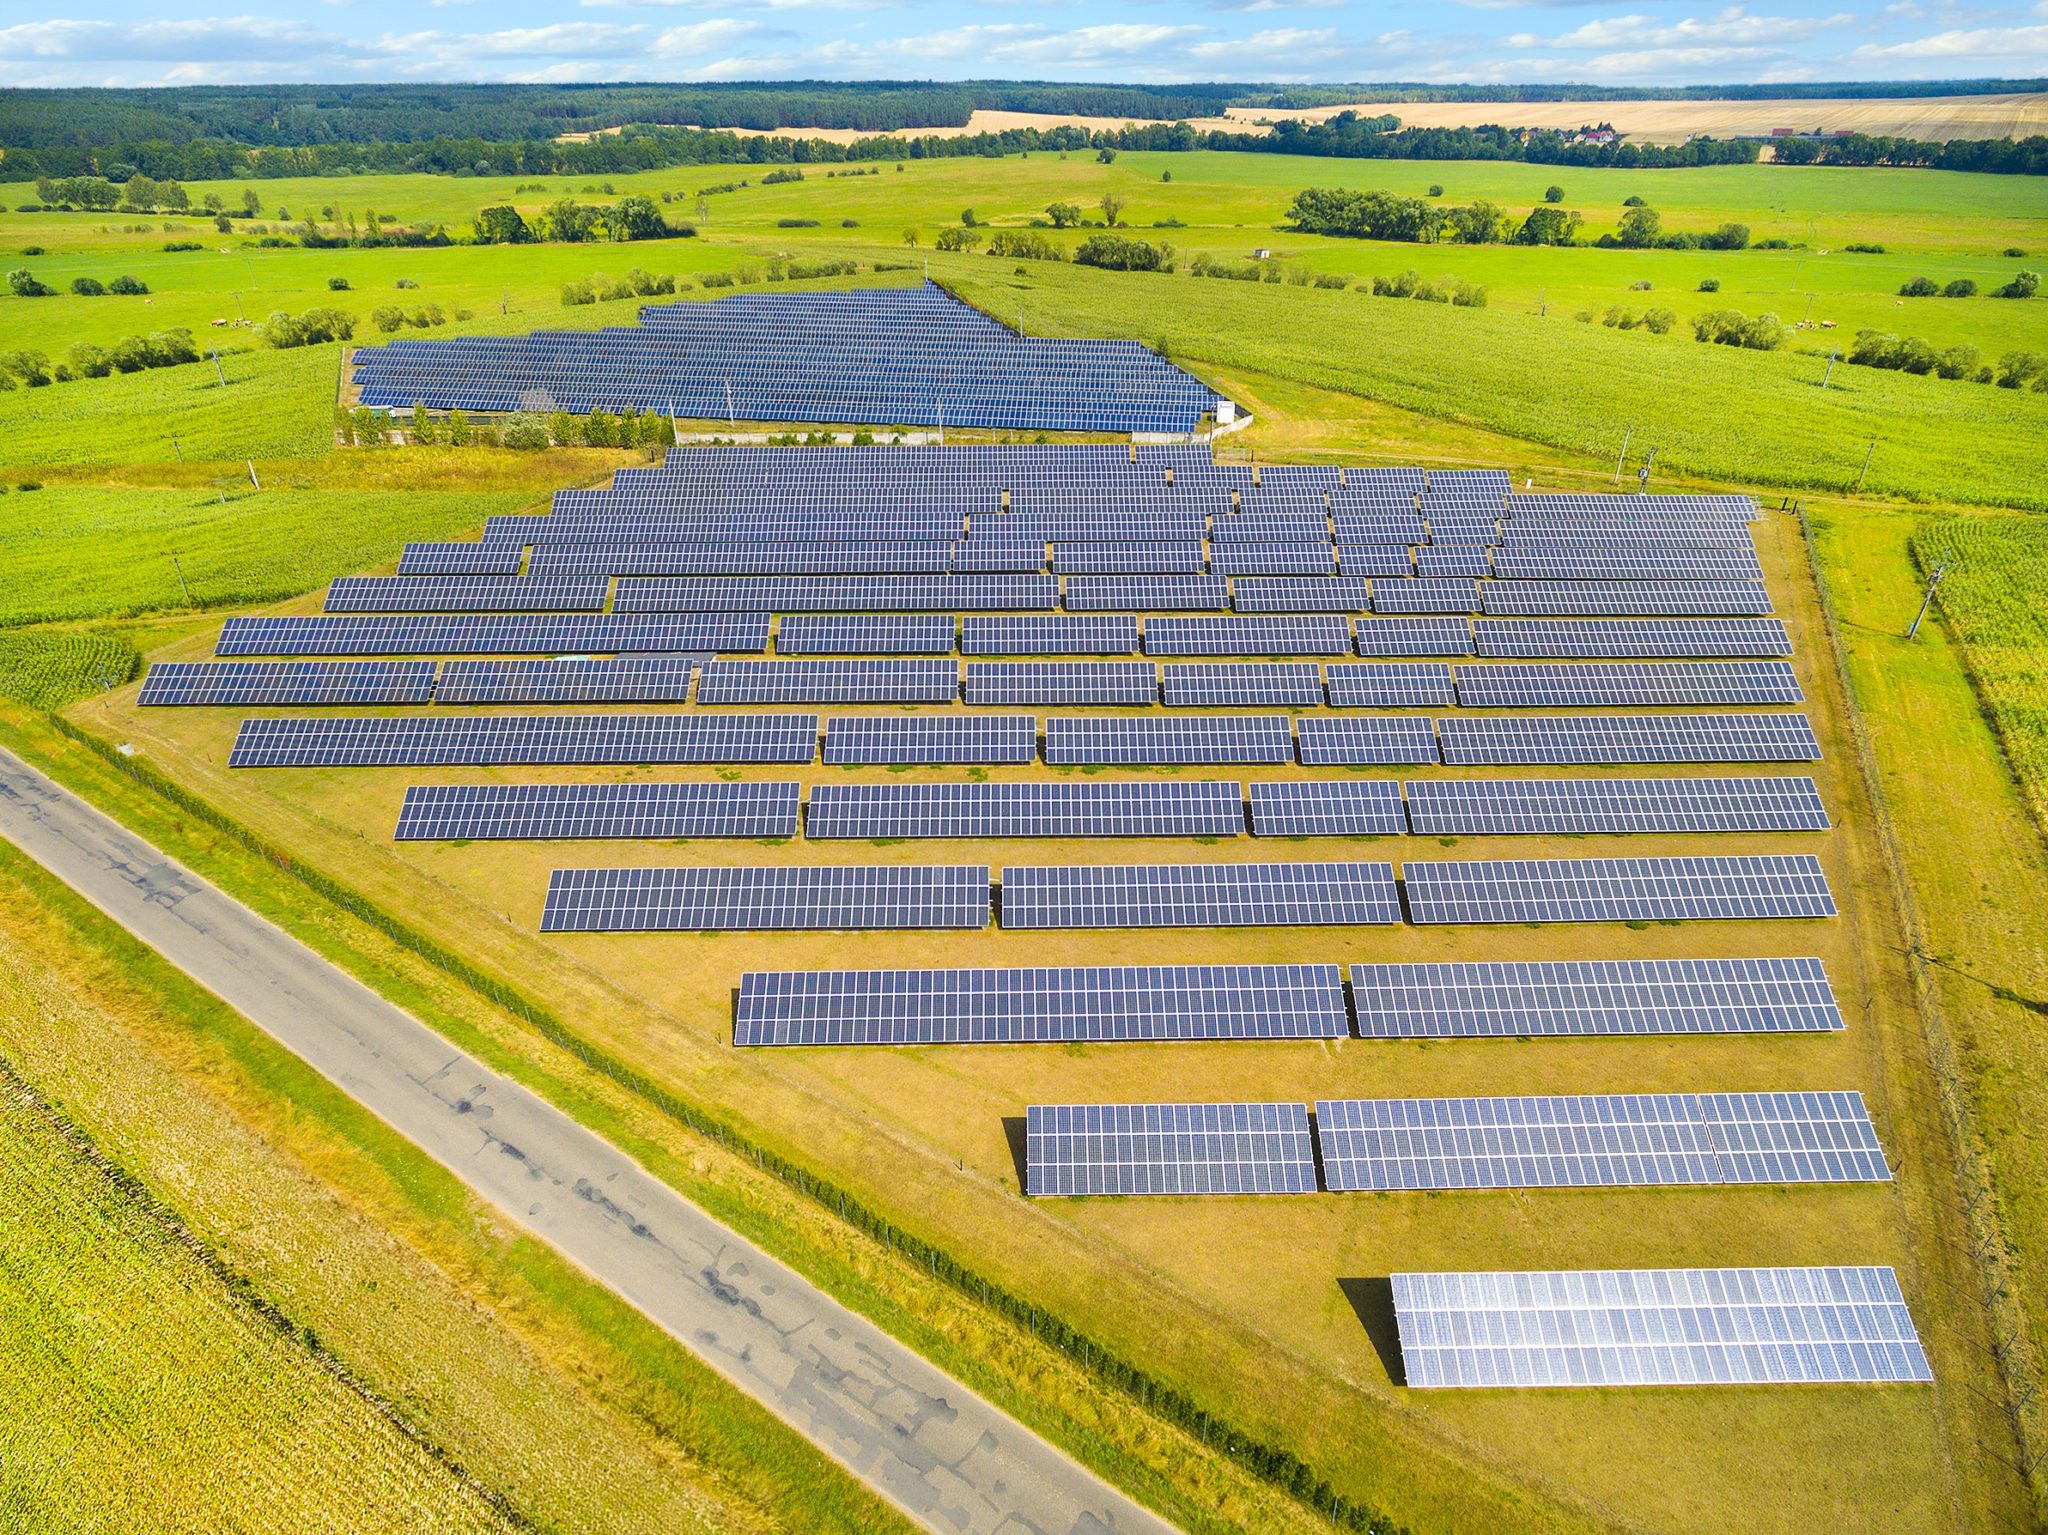 Aerial view of rows of solar panels in a small solar farm on flat green pastures with wooded areas in the background.